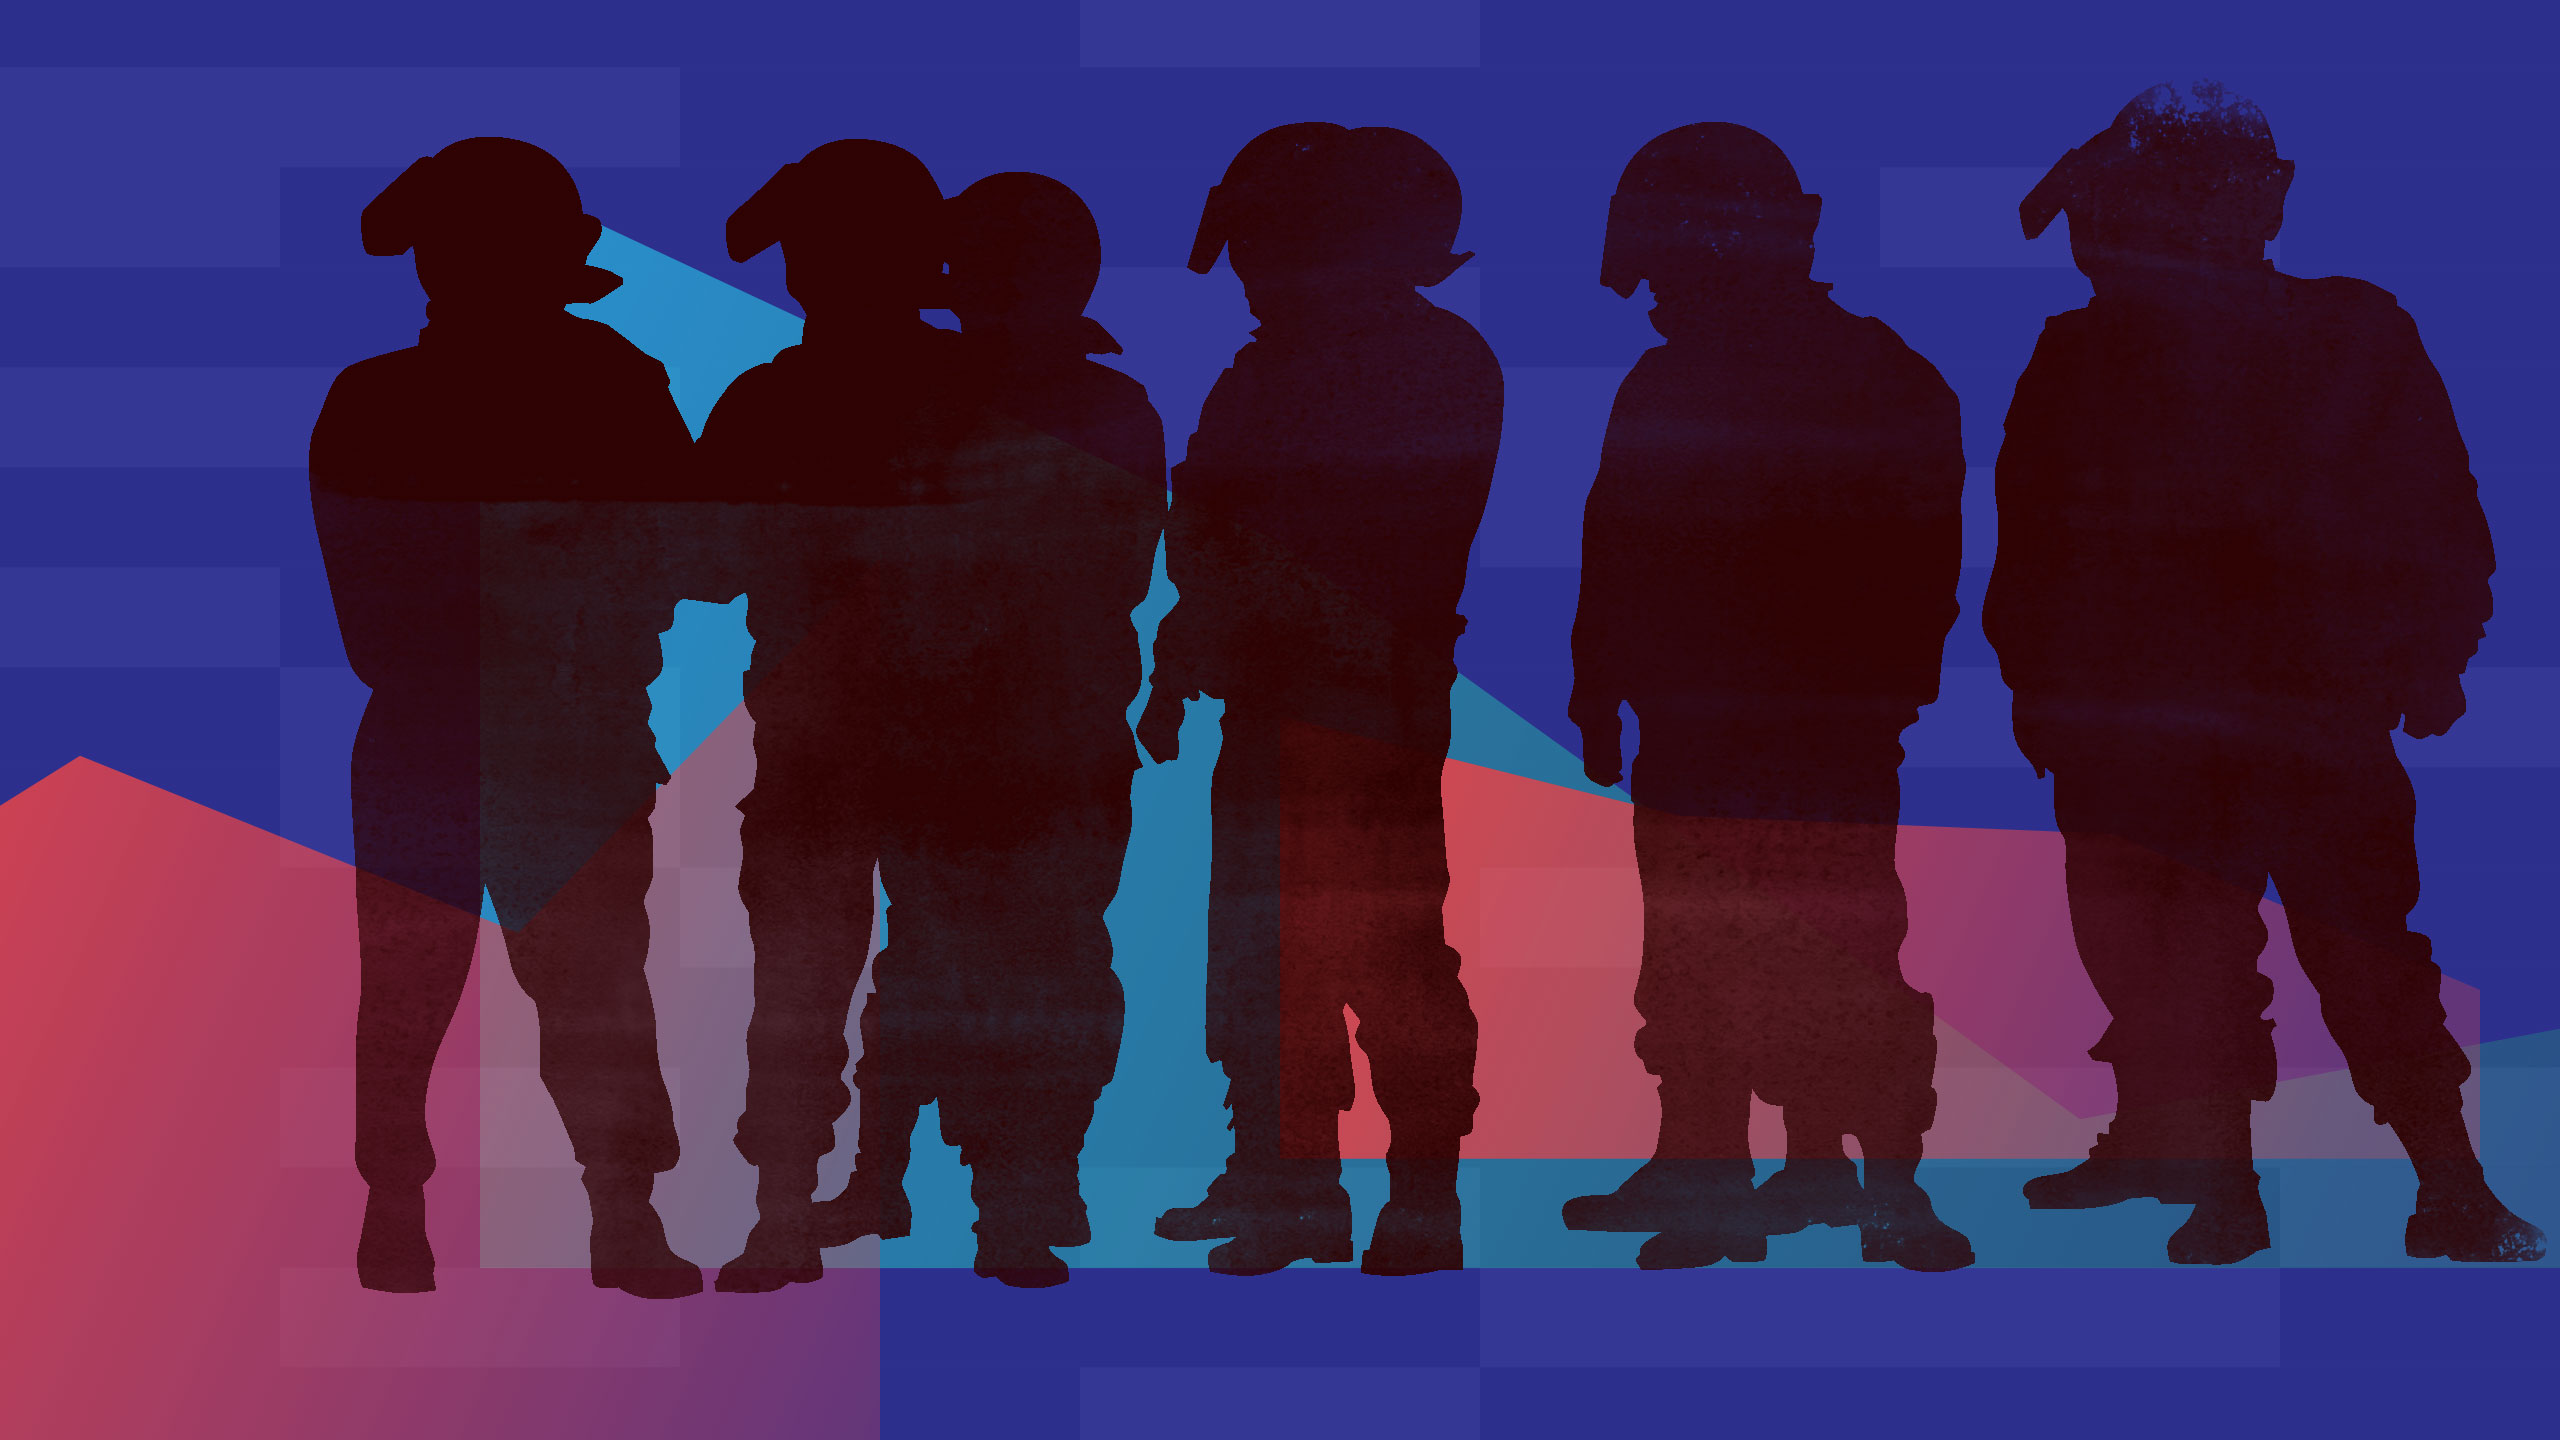 Illustration of police silhouettes on an abstract background.